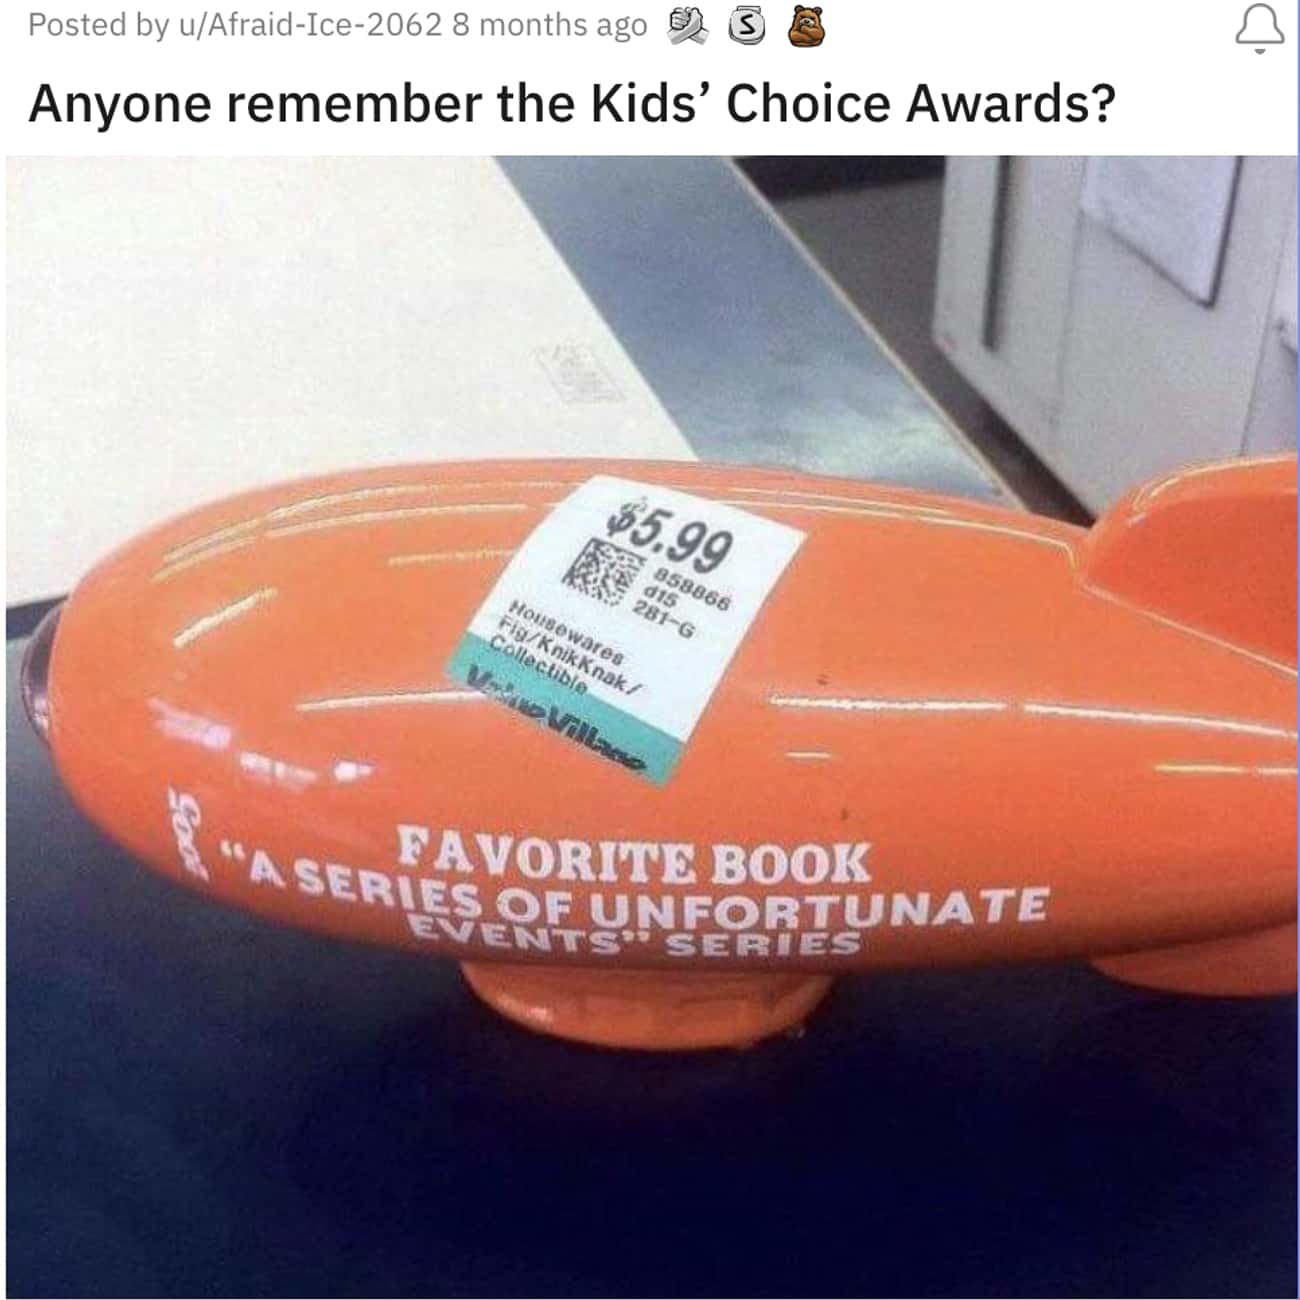 And The Kids Choice Award Goes To... Value Village?